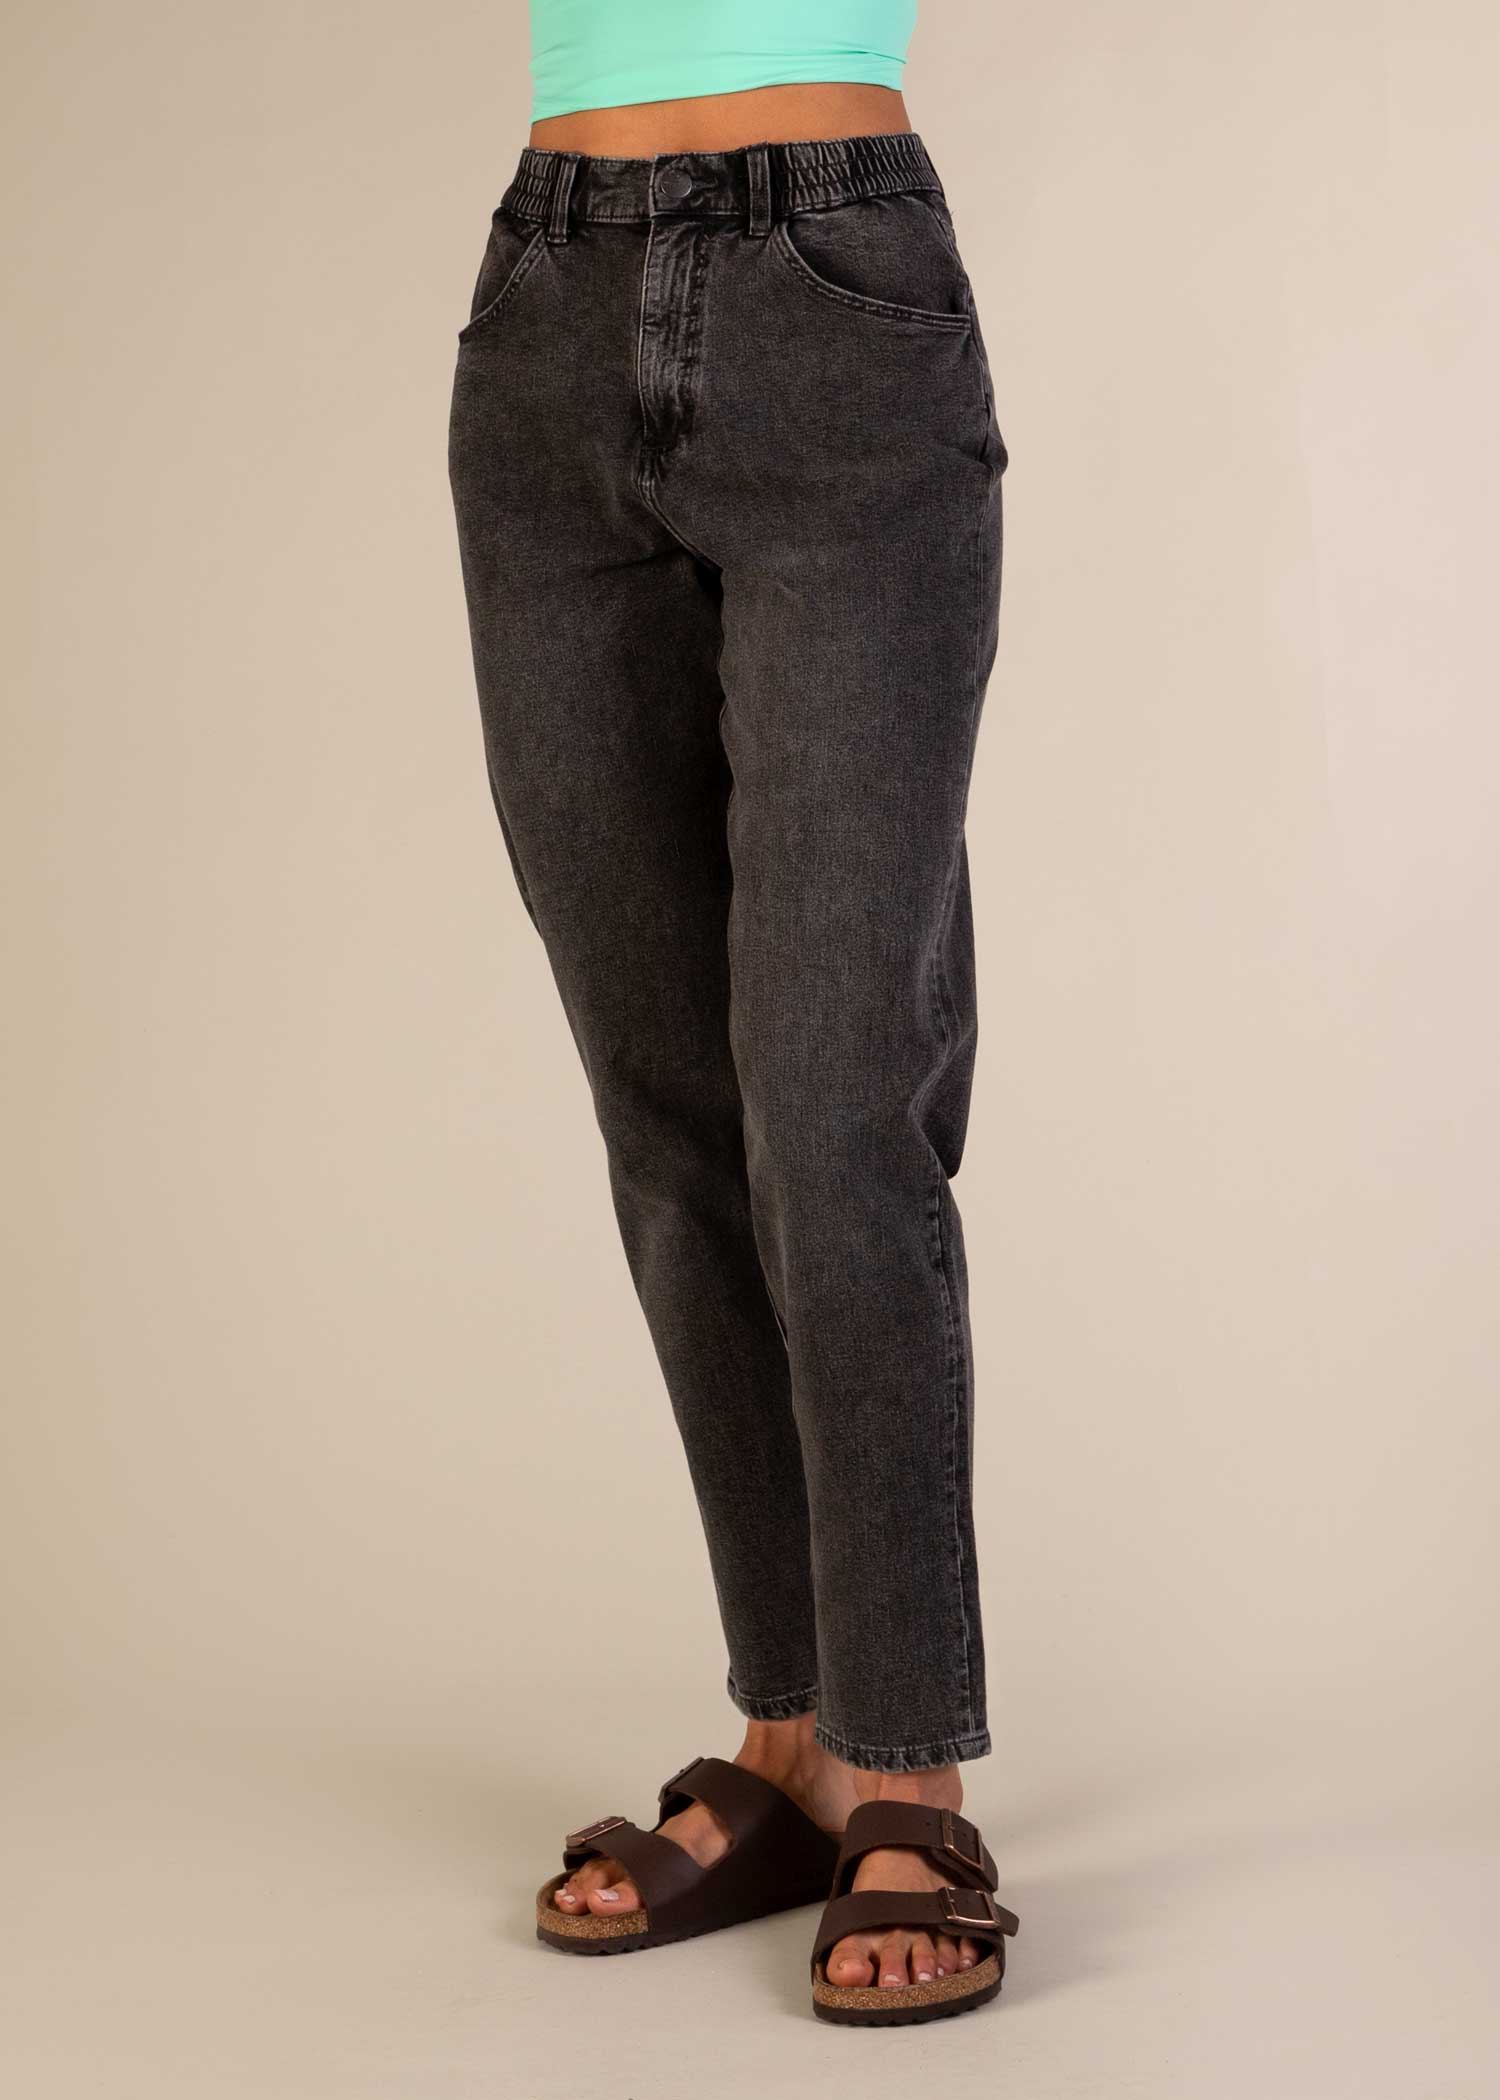 3RD ROCK Comfortable stretchy Denim Jeans - Natasha is 5ft 9" with a 25" waist, and is wearing a 28 RL. F